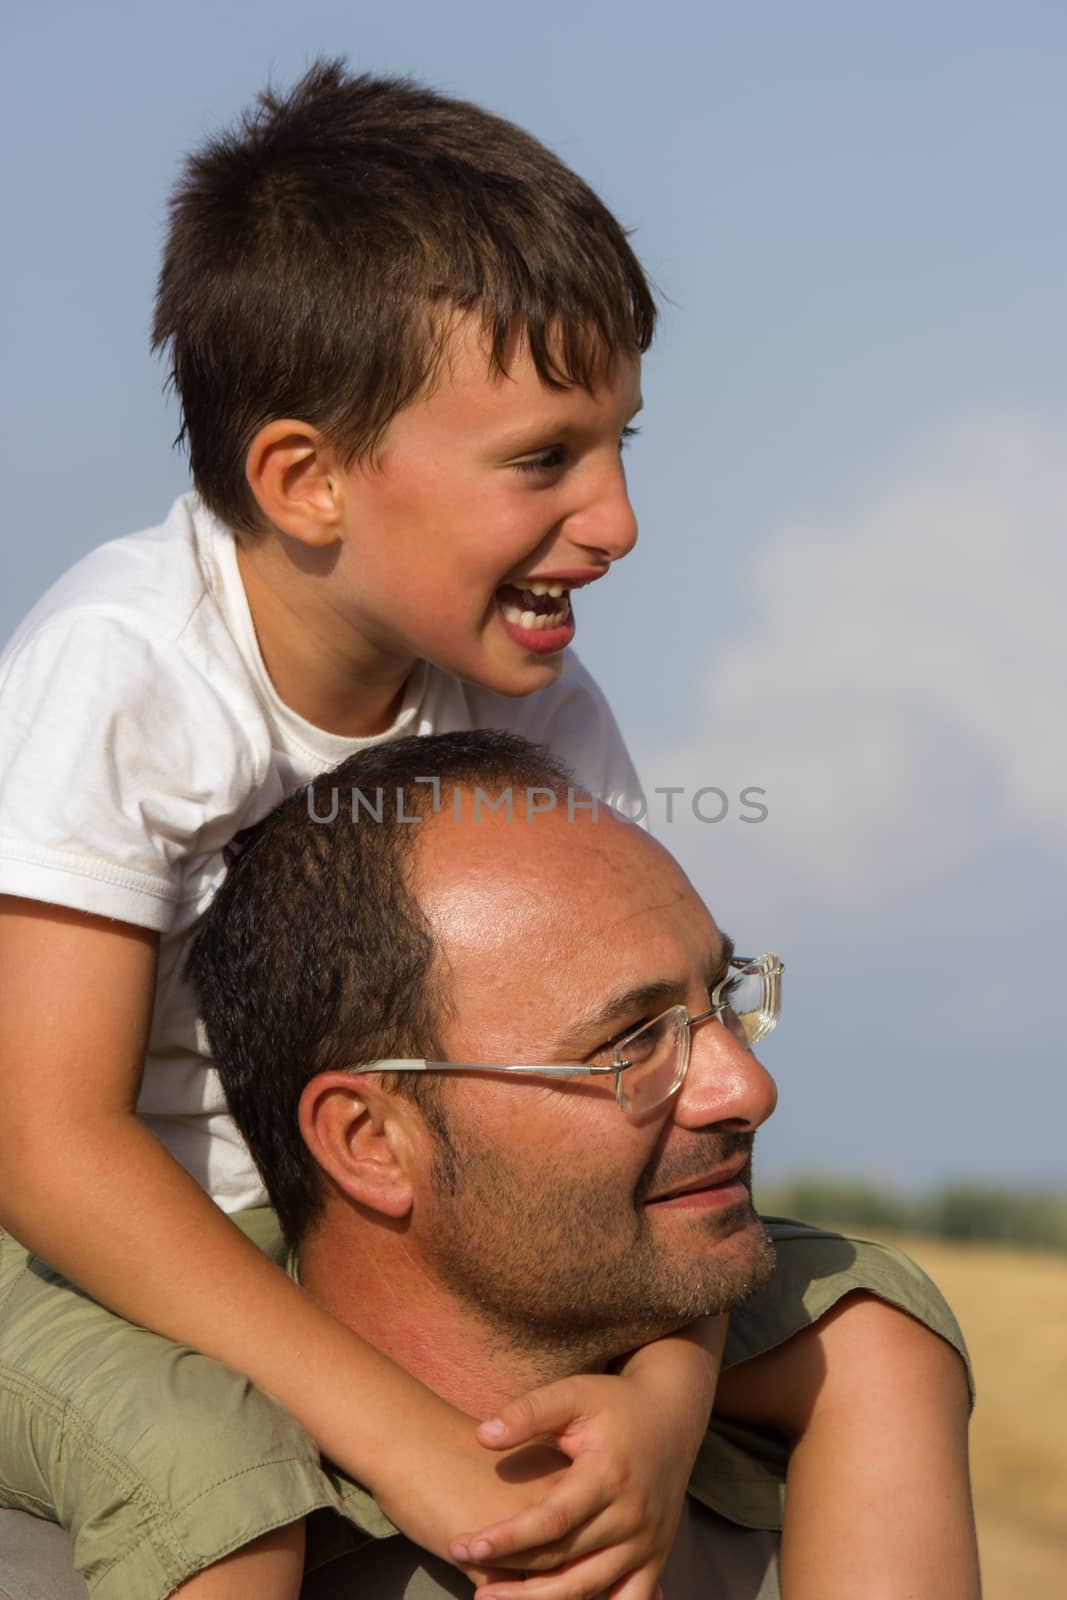 Baby on Dad's shoulders by goghy73